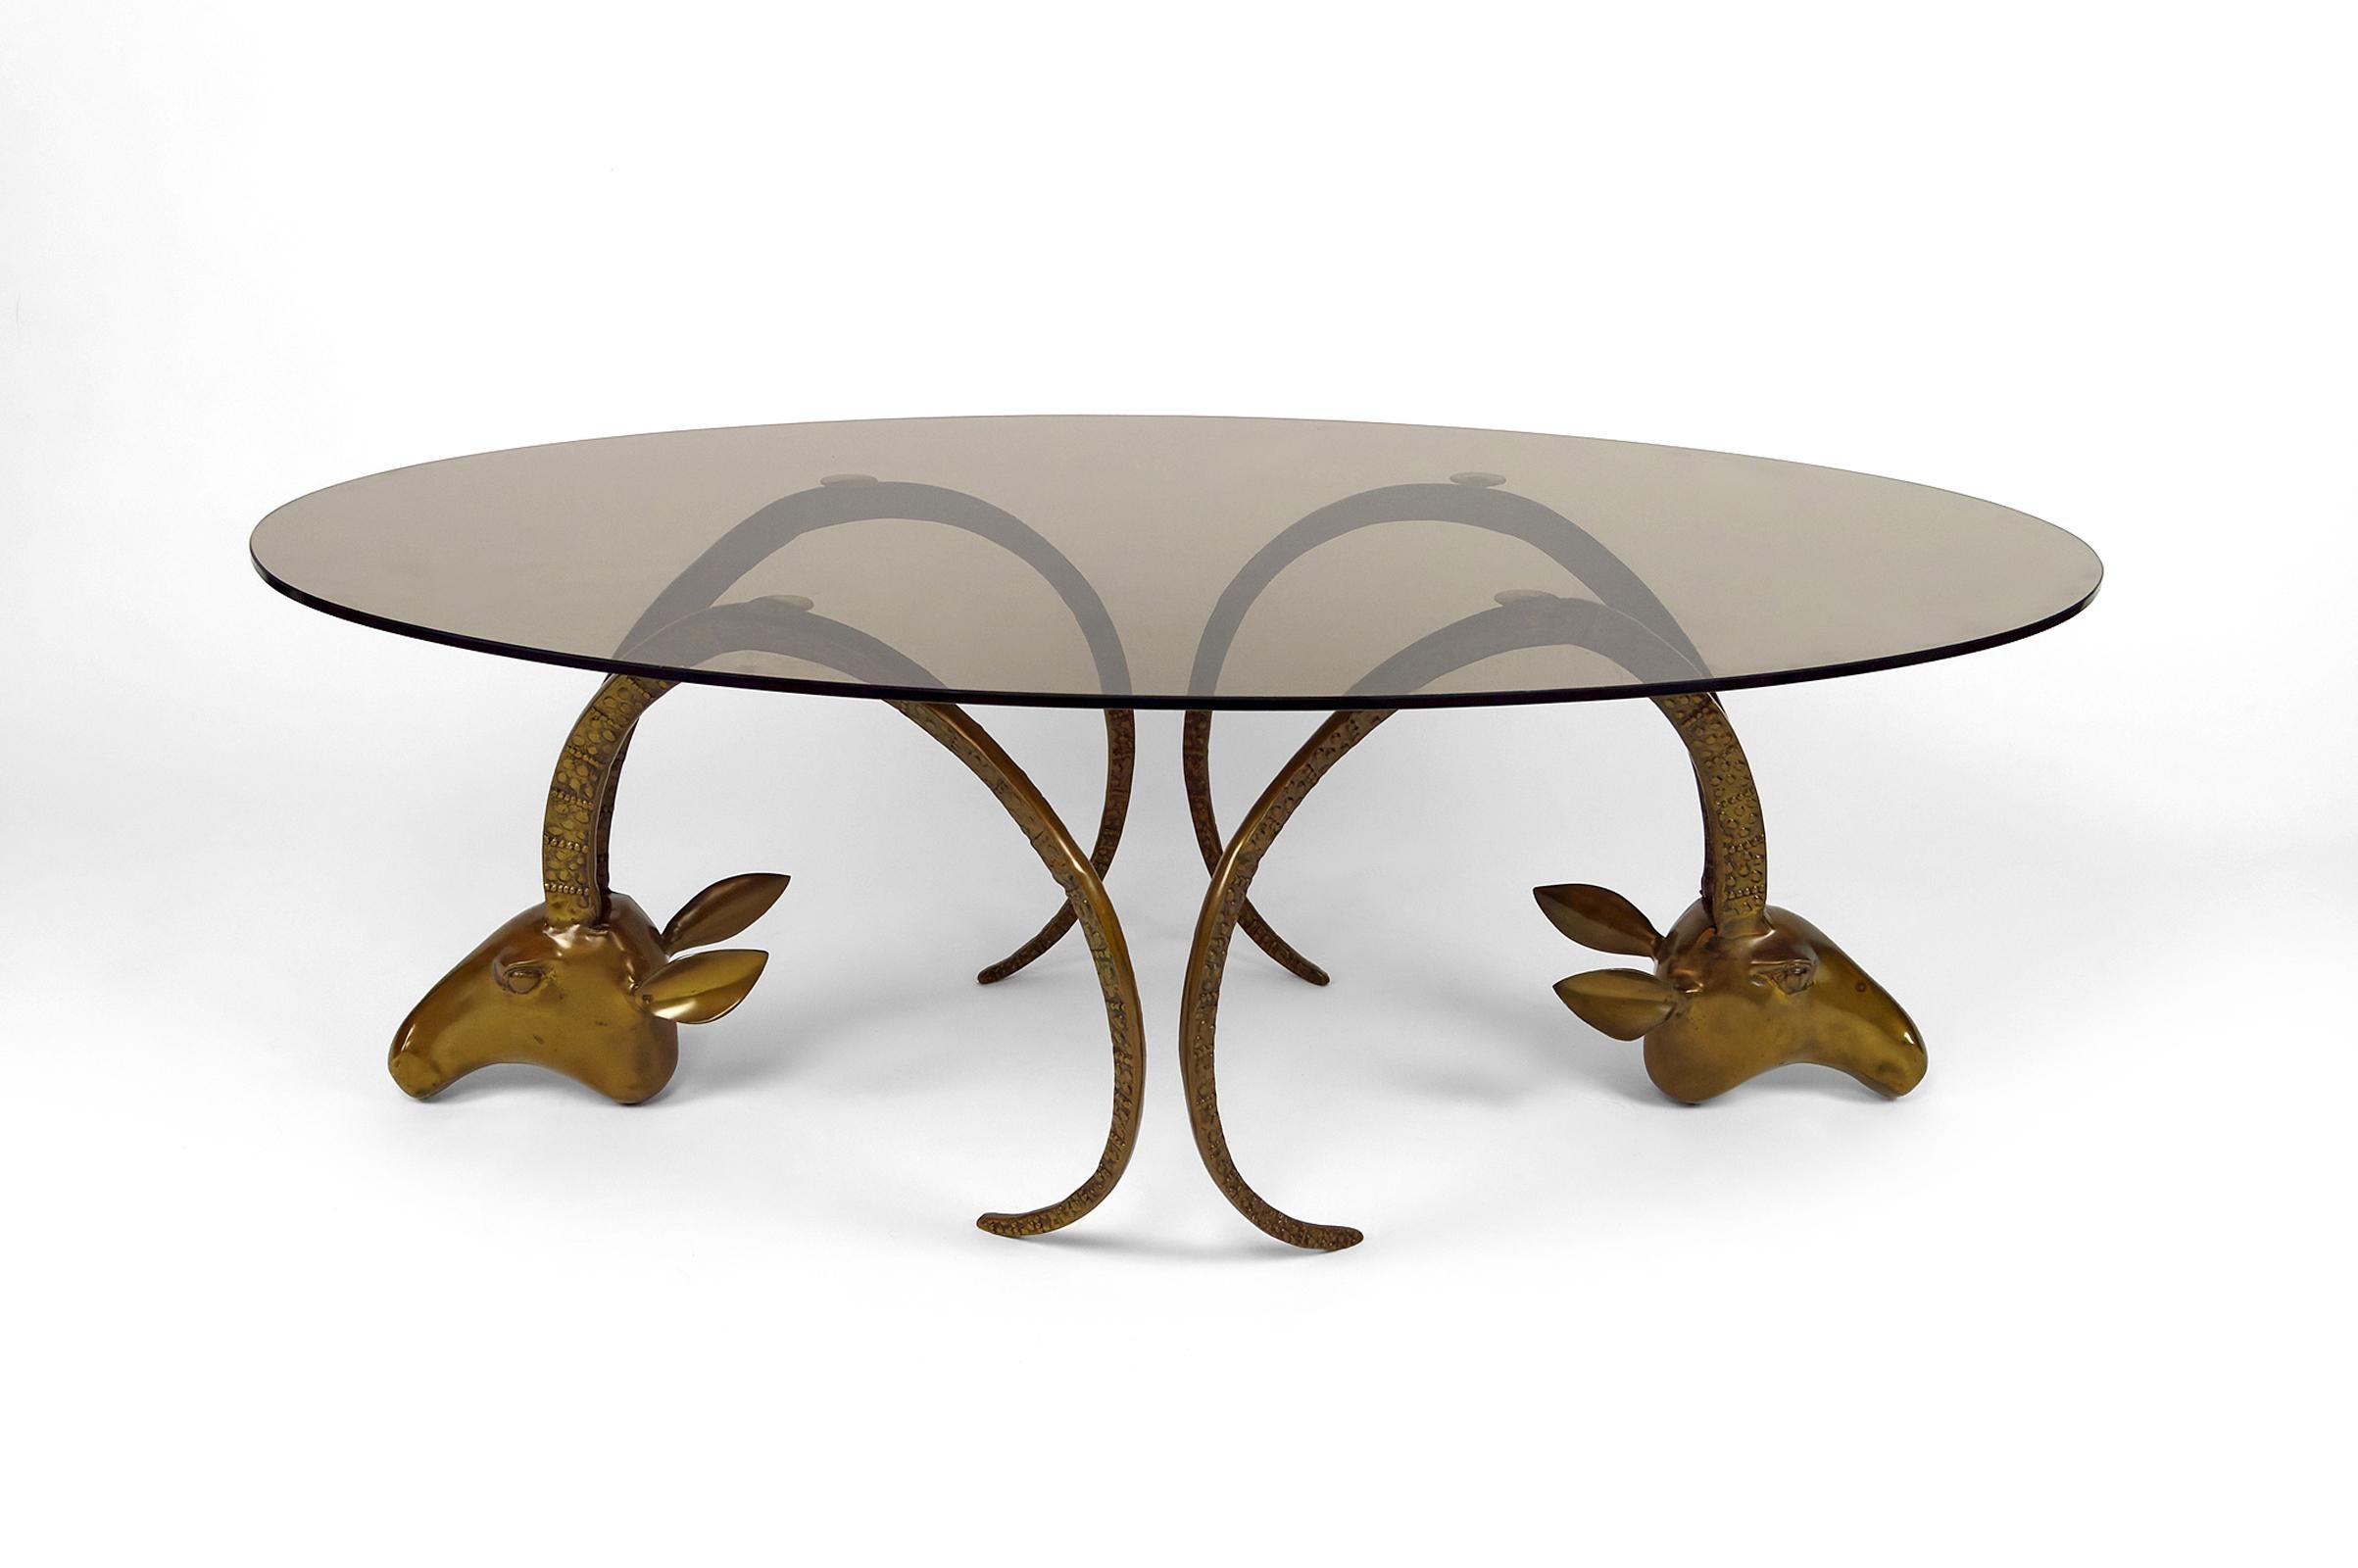 Superb coffee table composed of a pair of goat head sculptures (mouflons / ibex / antelopes) and a glass plate.

The mouflon heads are in patinated brass / bronze.
The oval tray is in smoked glass.

Hollywood Regency / Mid-Century Modern style,